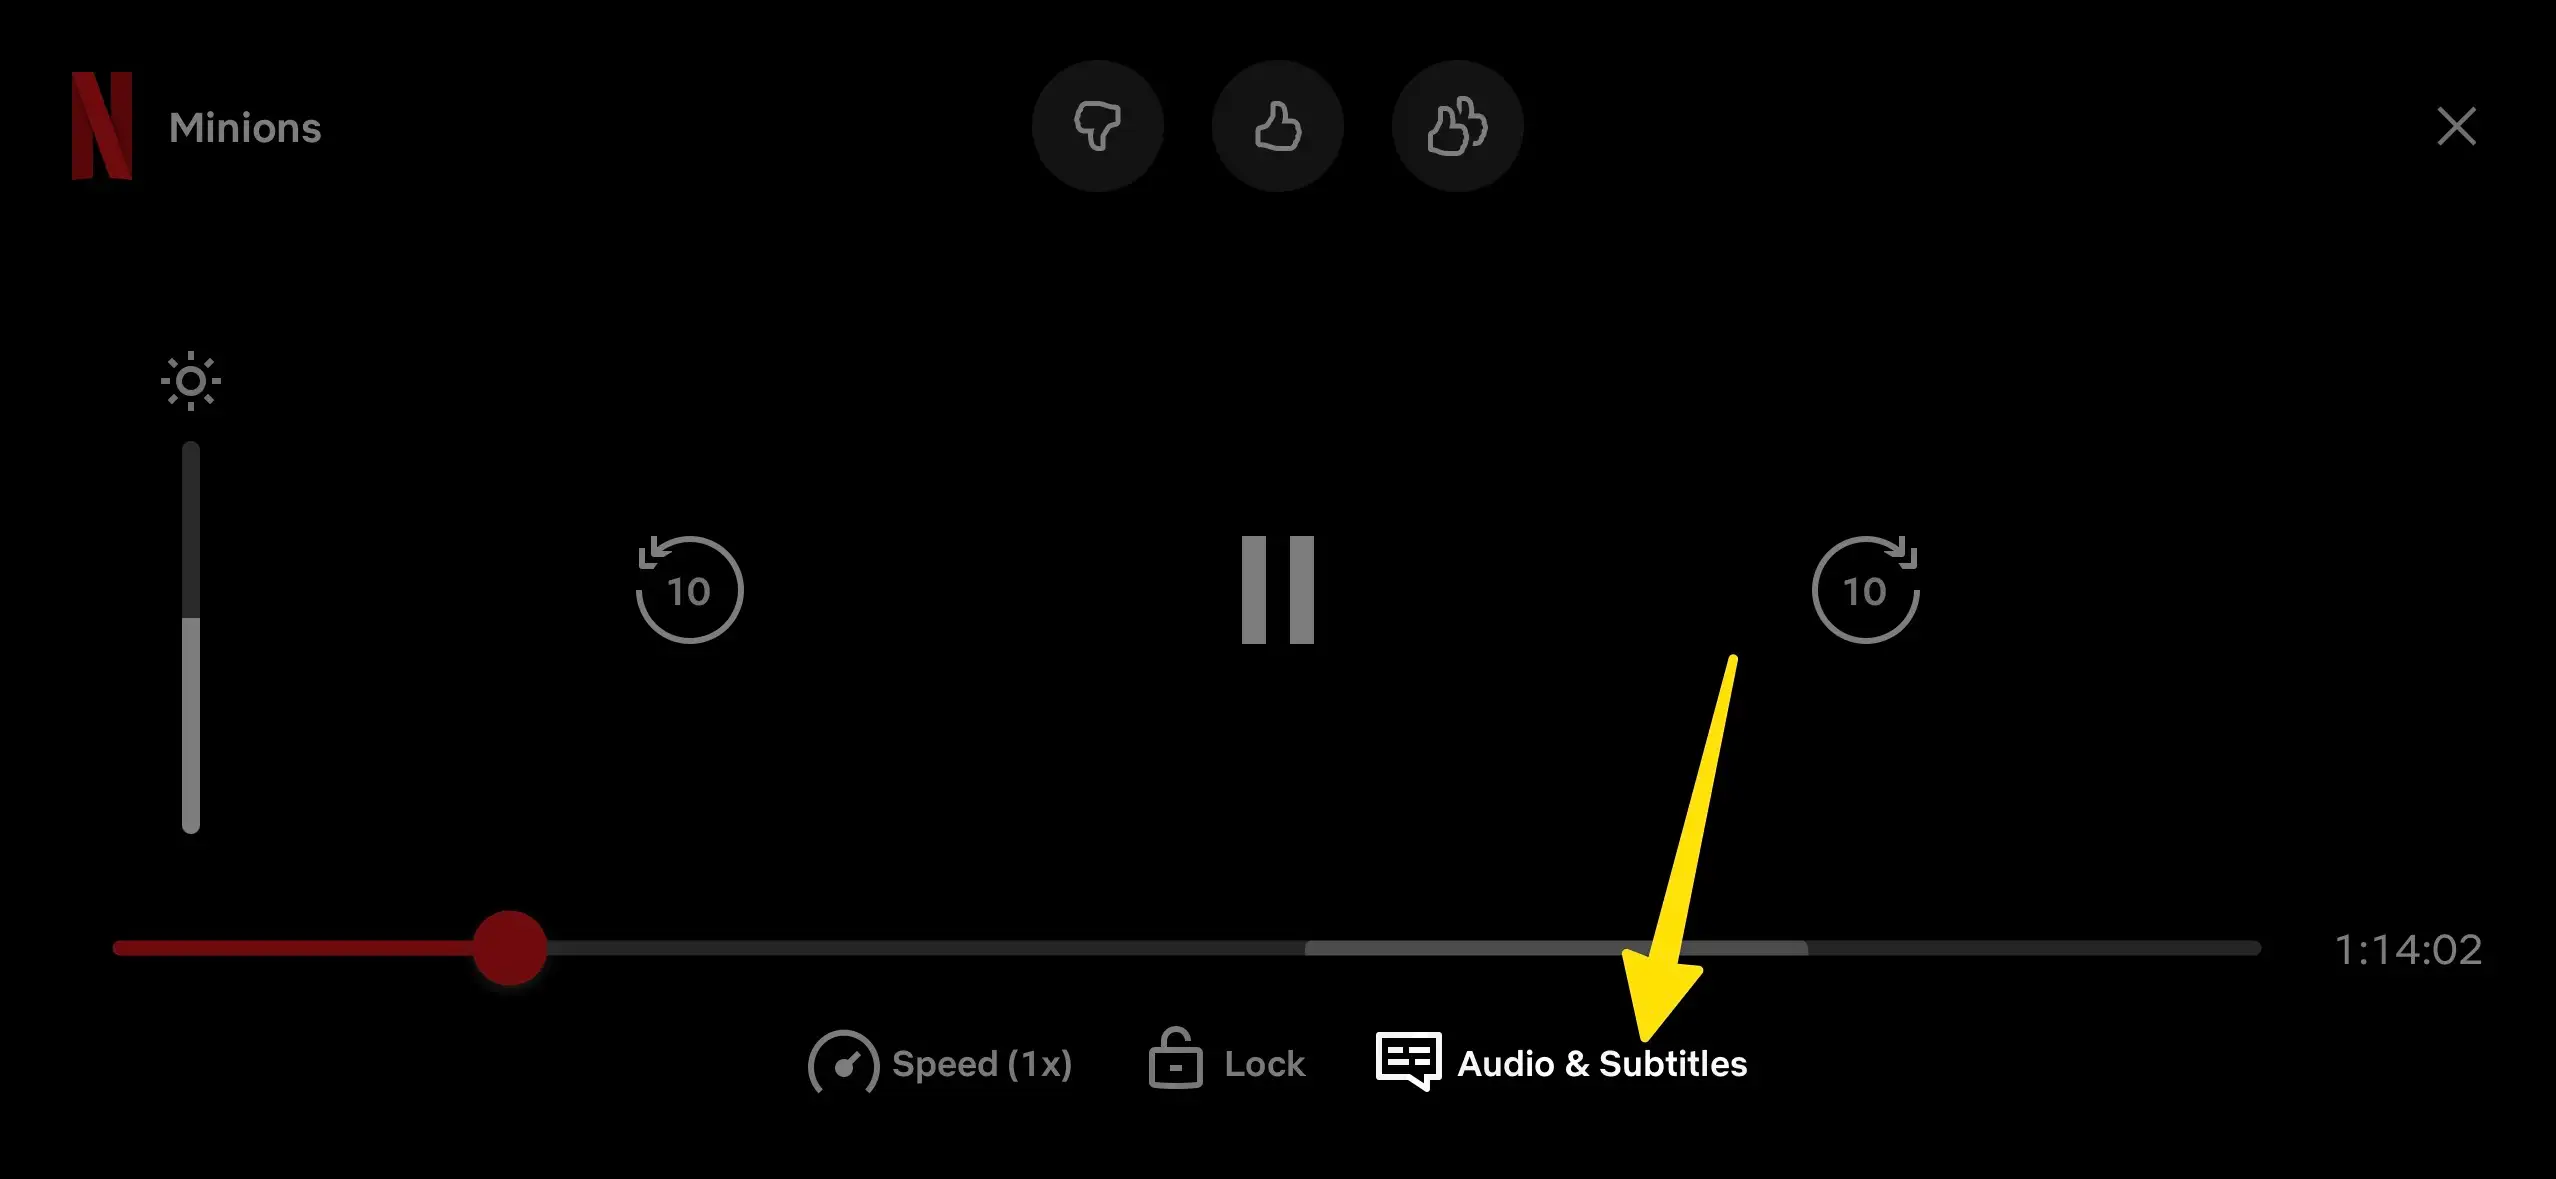 Select Audio & Subtitles on iPhone